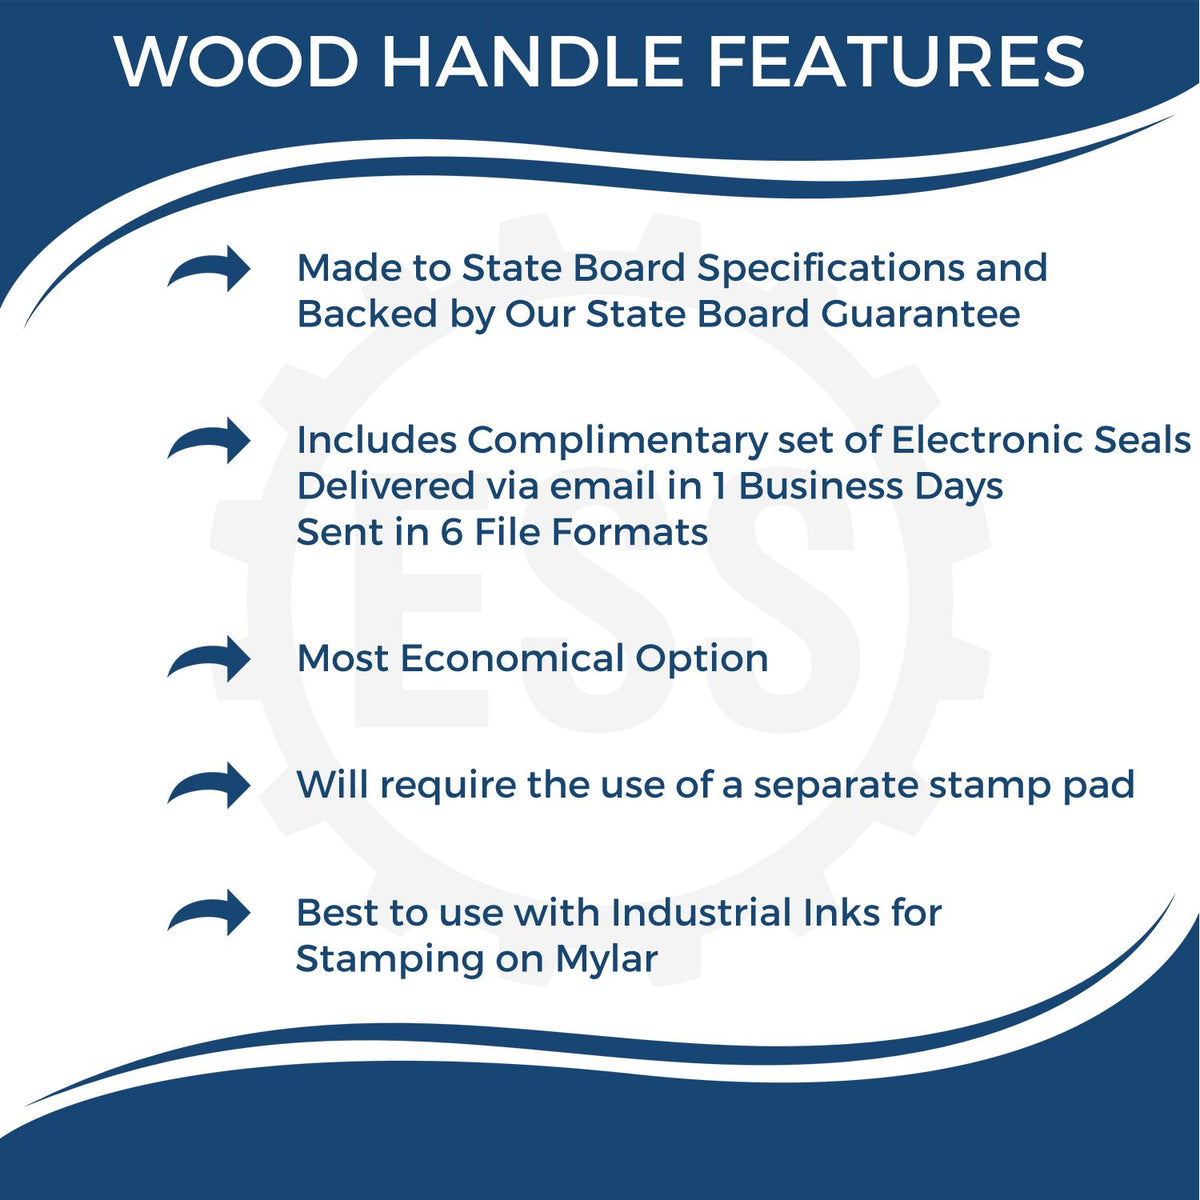 A picture of an infographic highlighting the selling points for the Wooden Handle South Carolina State Seal Notary Public Stamp